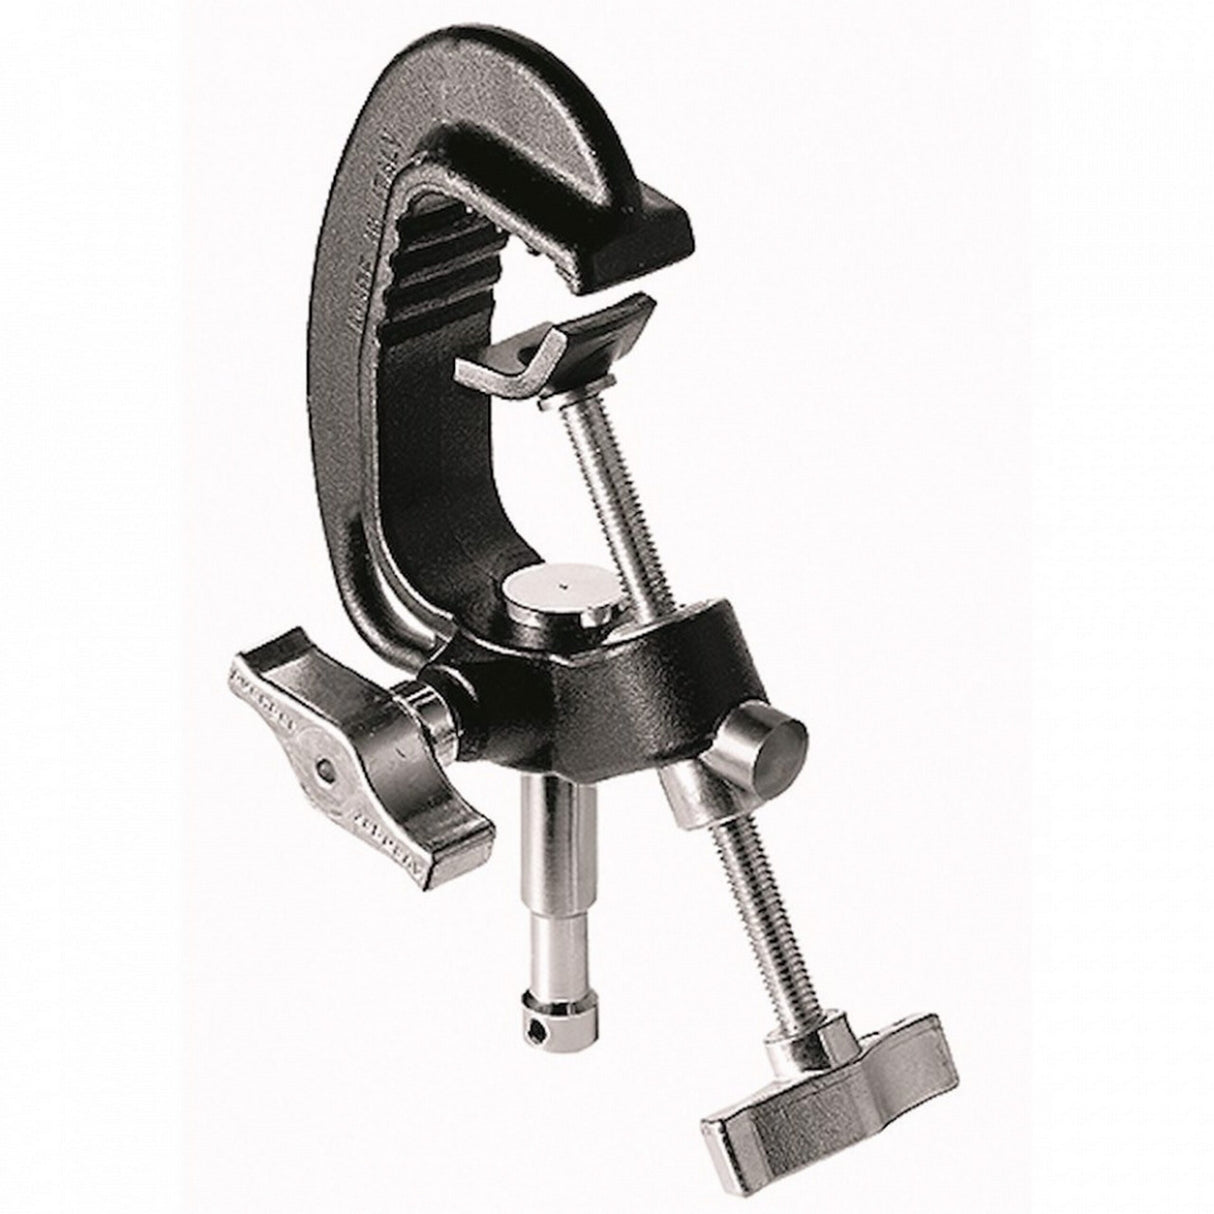 Avenger C338 Quick Action Baby Clamp with 16mm Pin